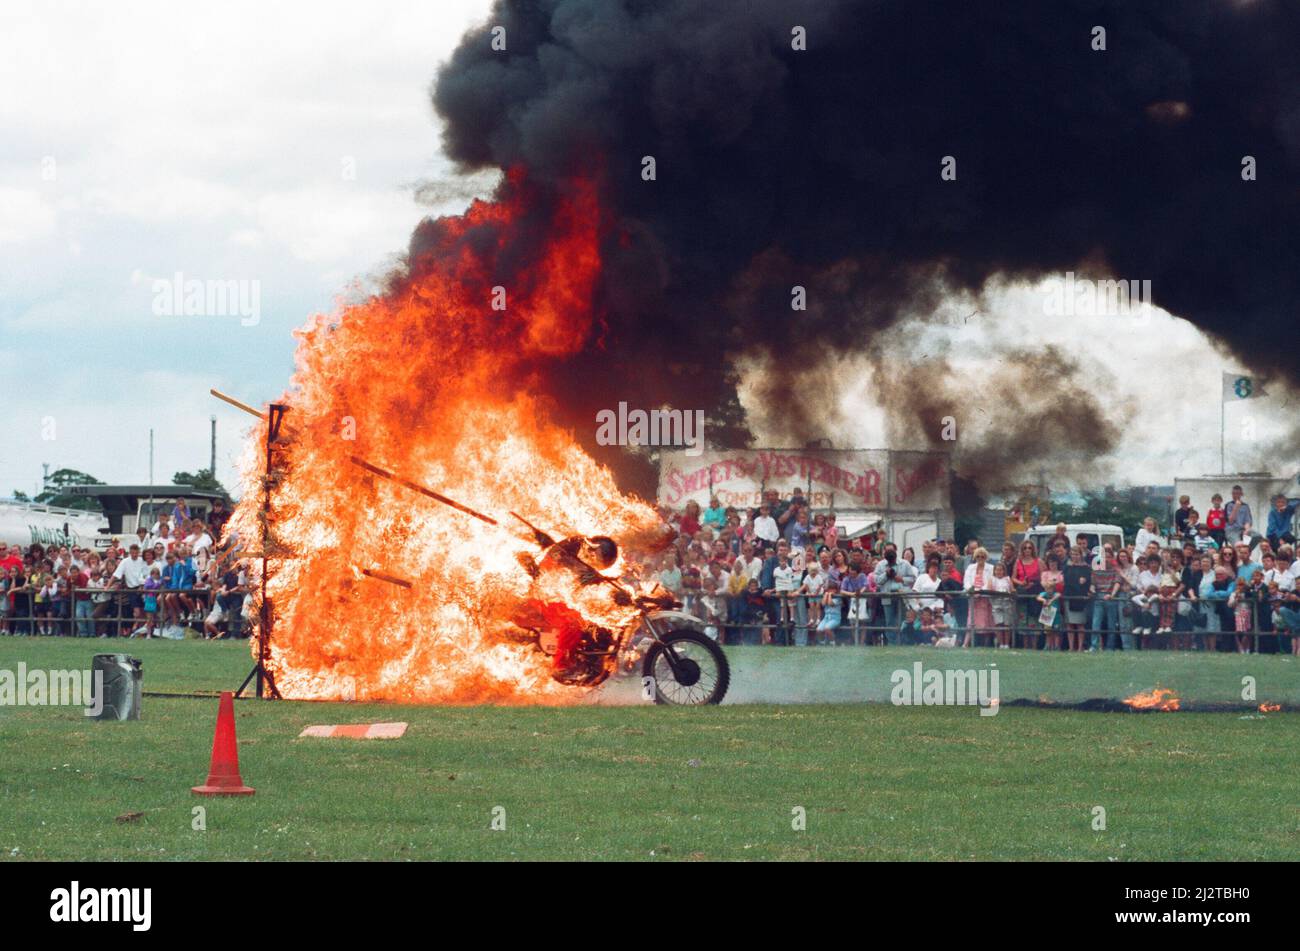 The British Steel Gala -The Magnificent 7 motorcycle team in action. 4th July 1993. Stock Photo